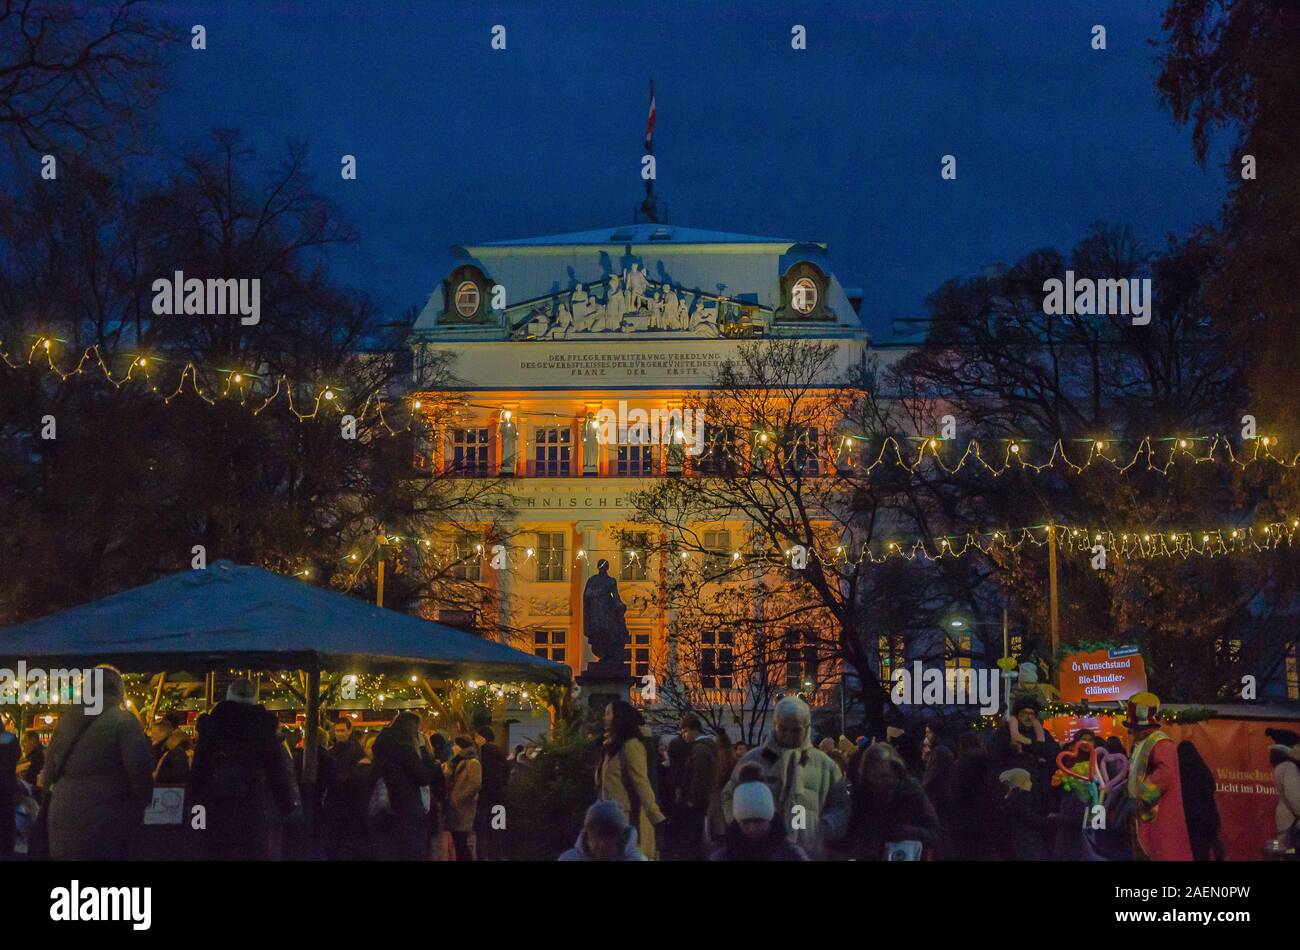 Vienna Christmas markets have great settings. The Karlsplatz version is no exception, nestled in front of Karlskirche and the Technische Universität. Stock Photo